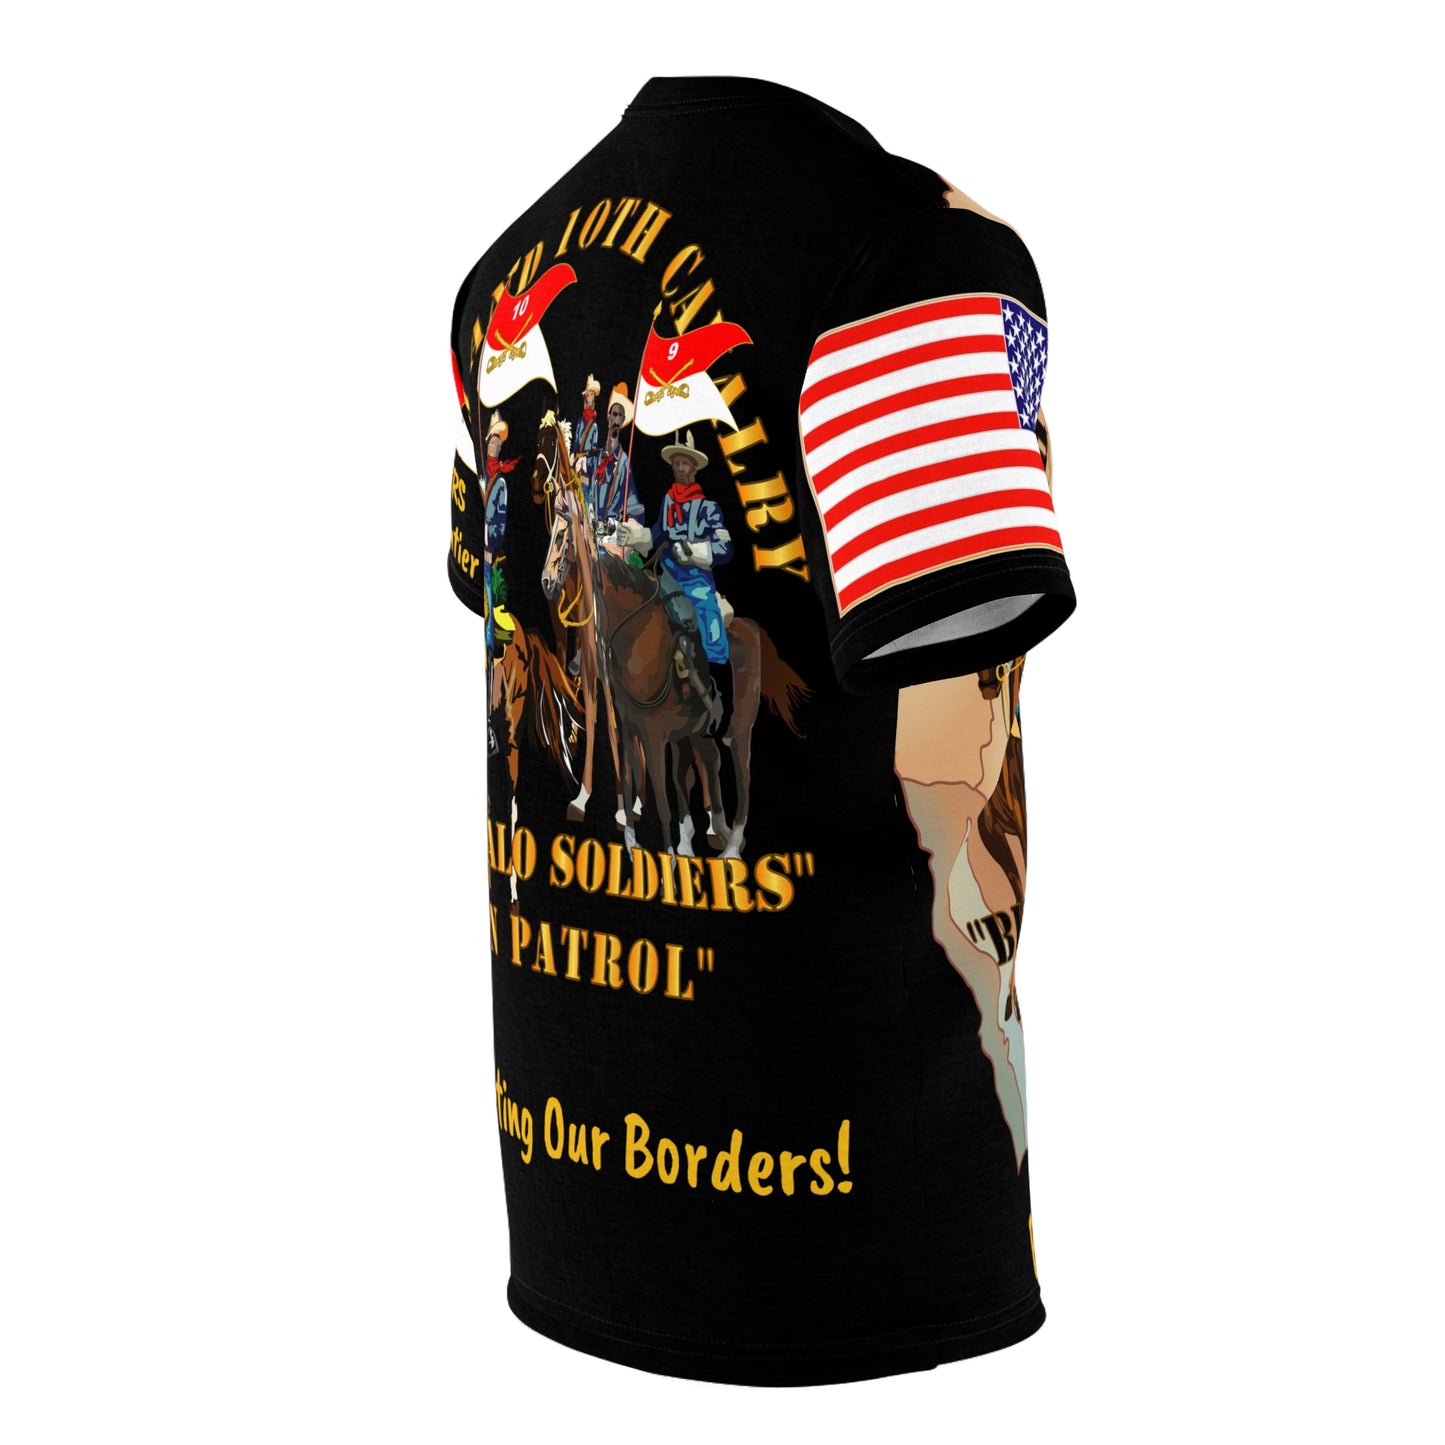 AOP - Army - 9th and 10th Cavalrymen - Buffalo Soldiers - Building America - Protecting Borders!